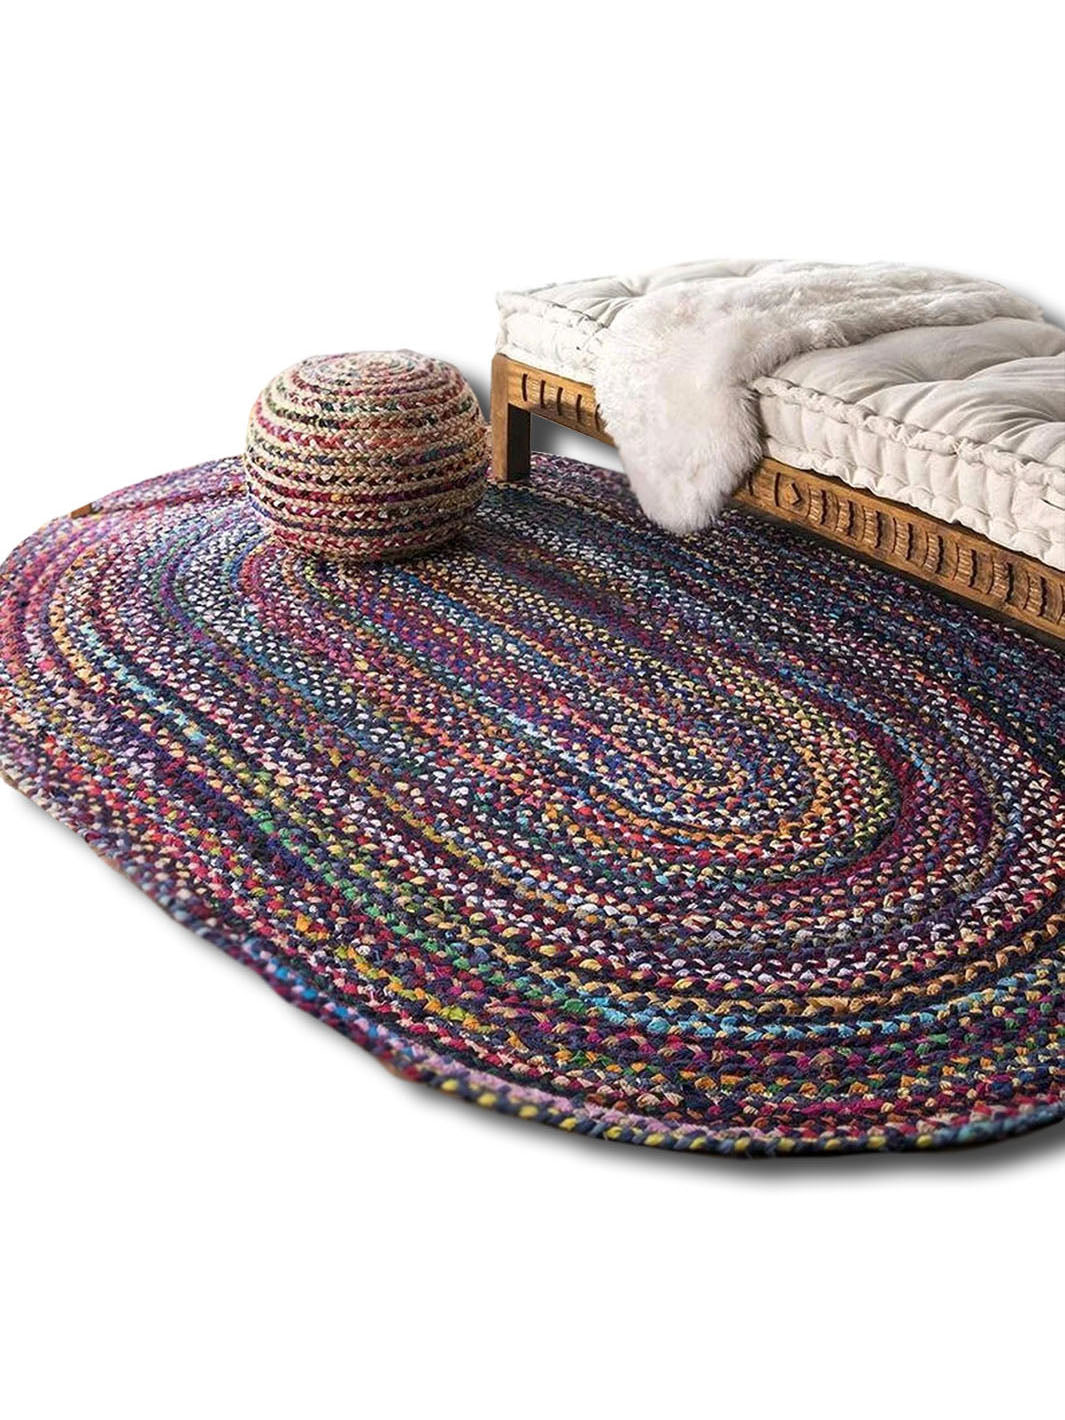 Handcrafted Colorful Bohemian Braided Rounded Cotton Rug Chouhan Rugs CRH0252